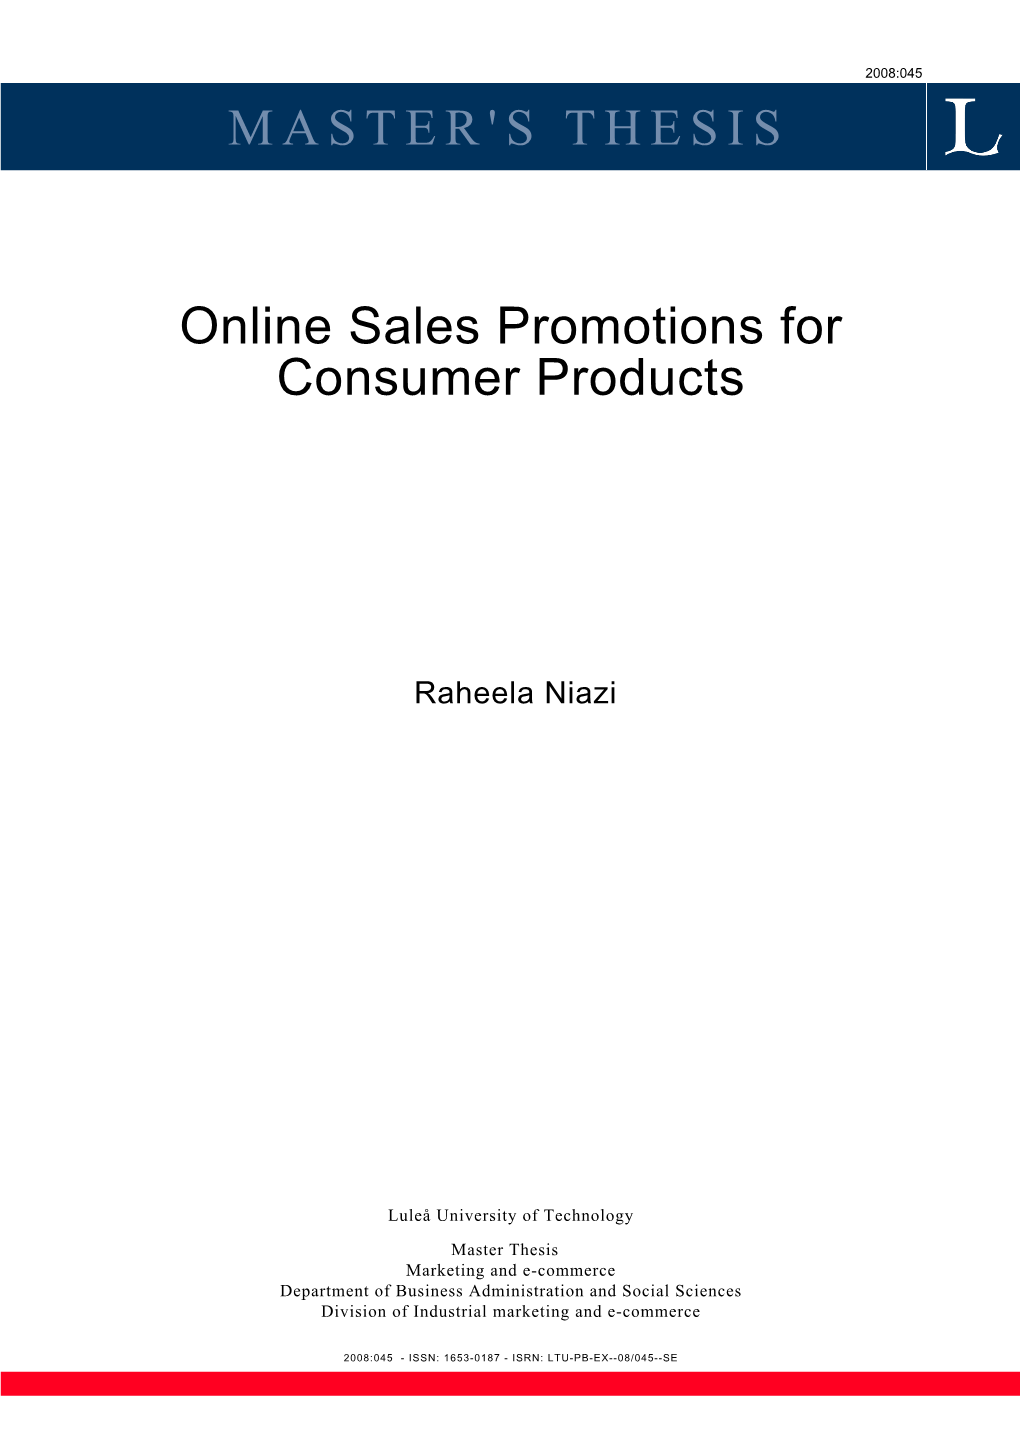 MASTER's THESIS Online Sales Promotions for Consumer Products